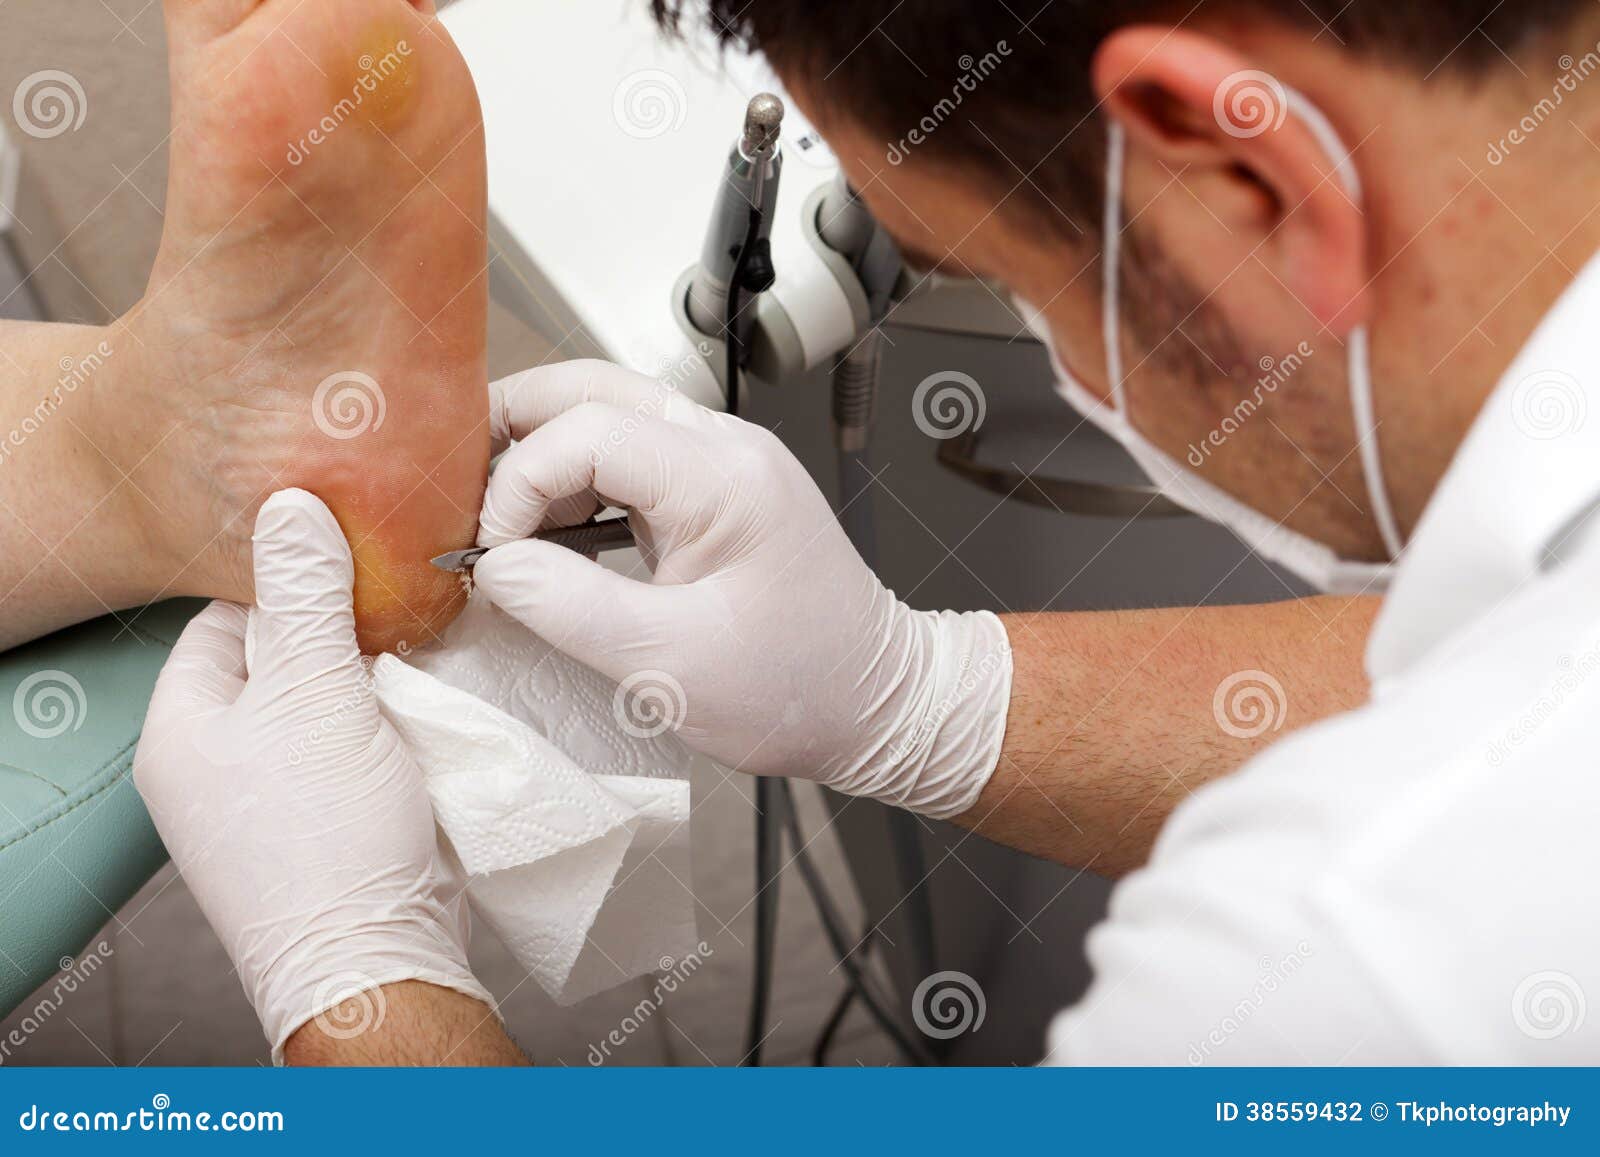 Chiropodists Working With A Scalpel Stock Photography